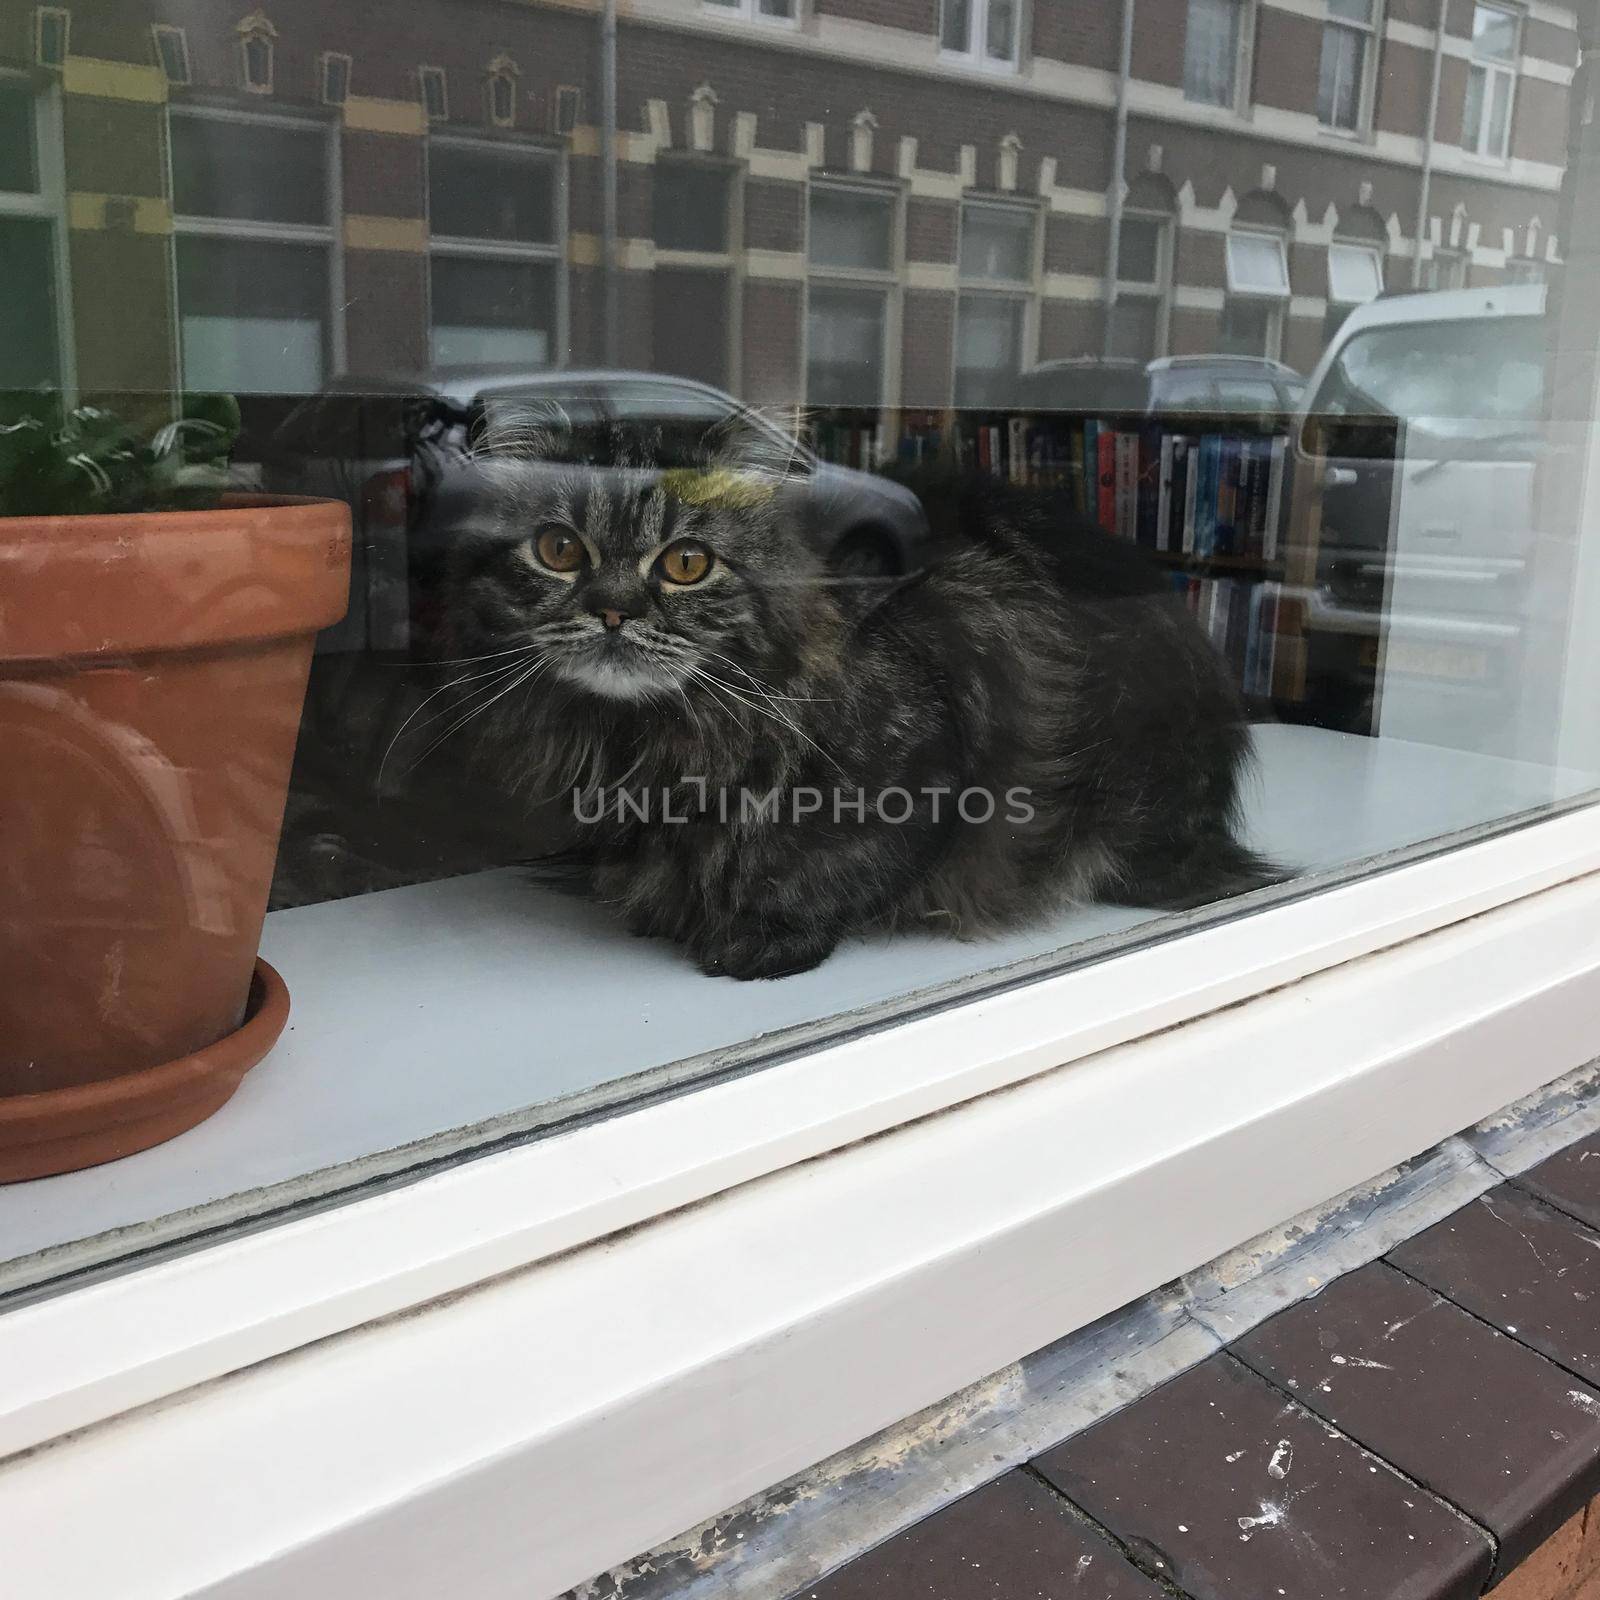 Tabby cat sitting behind a window showing reflections of the street by LeoniekvanderVliet